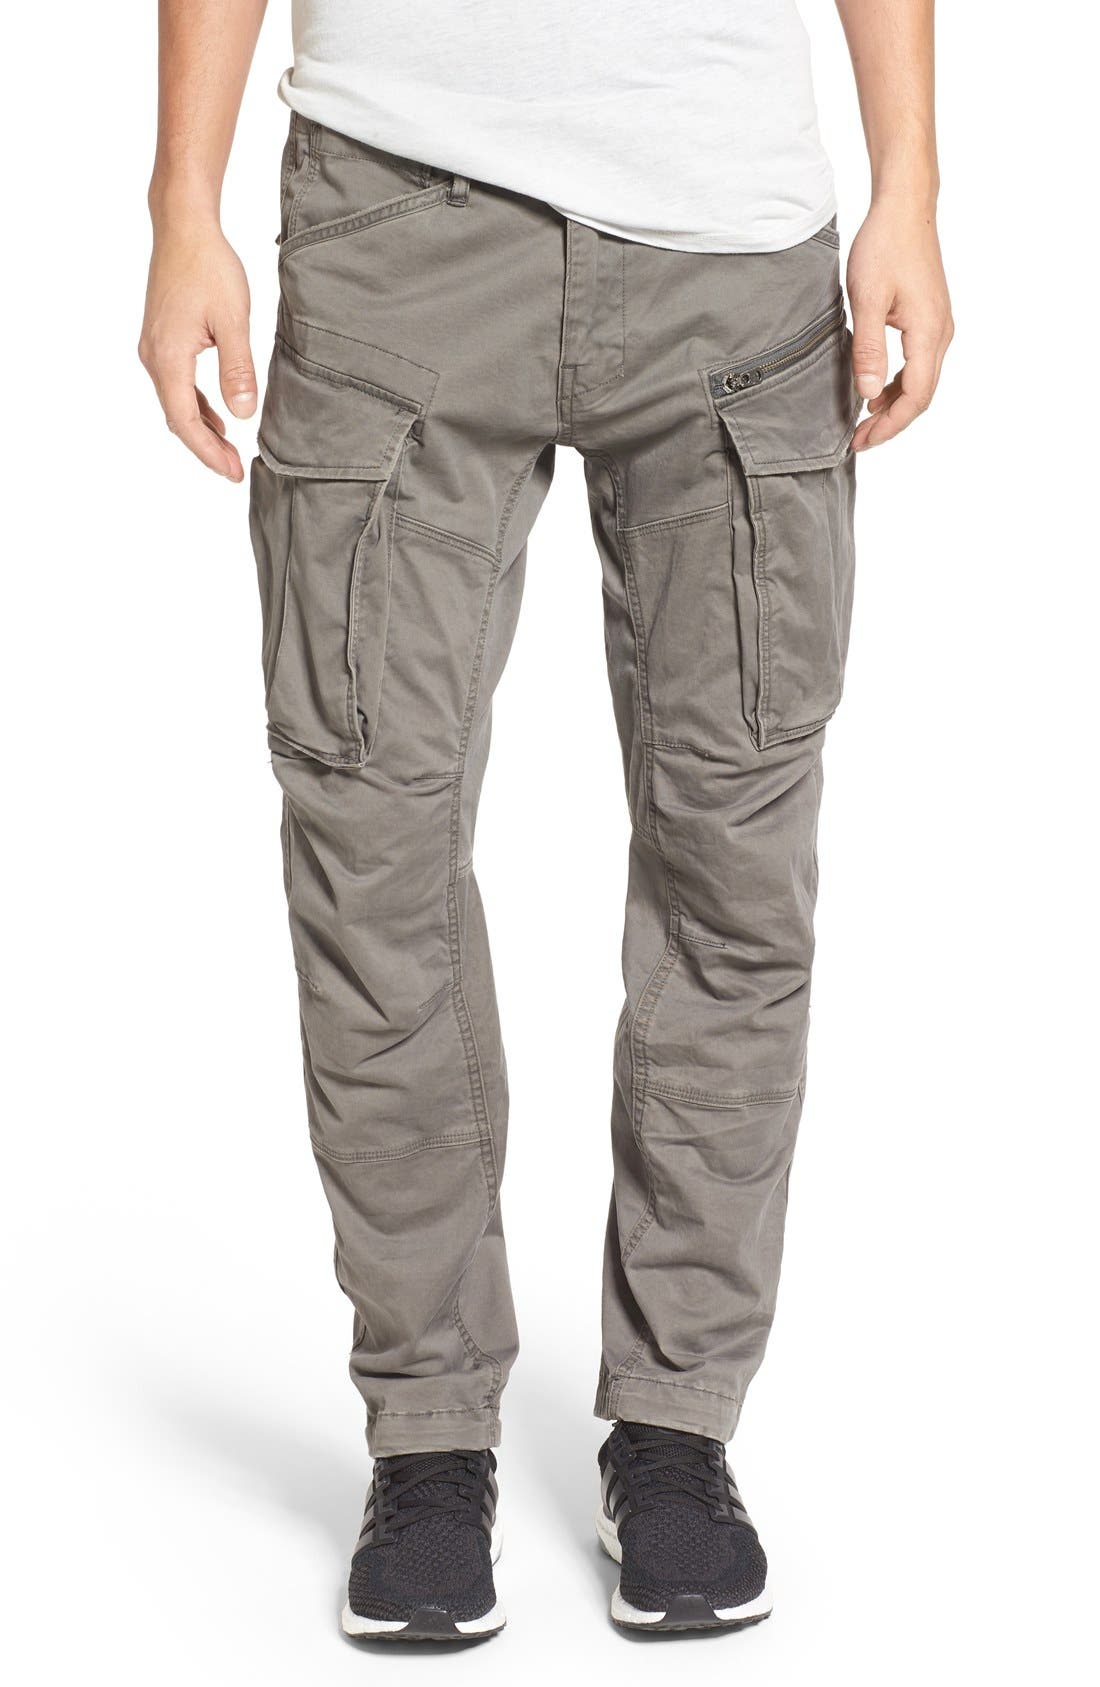 G-STAR RAW ROVIK TAPERED FIT CARGO PANTS,8718598587767